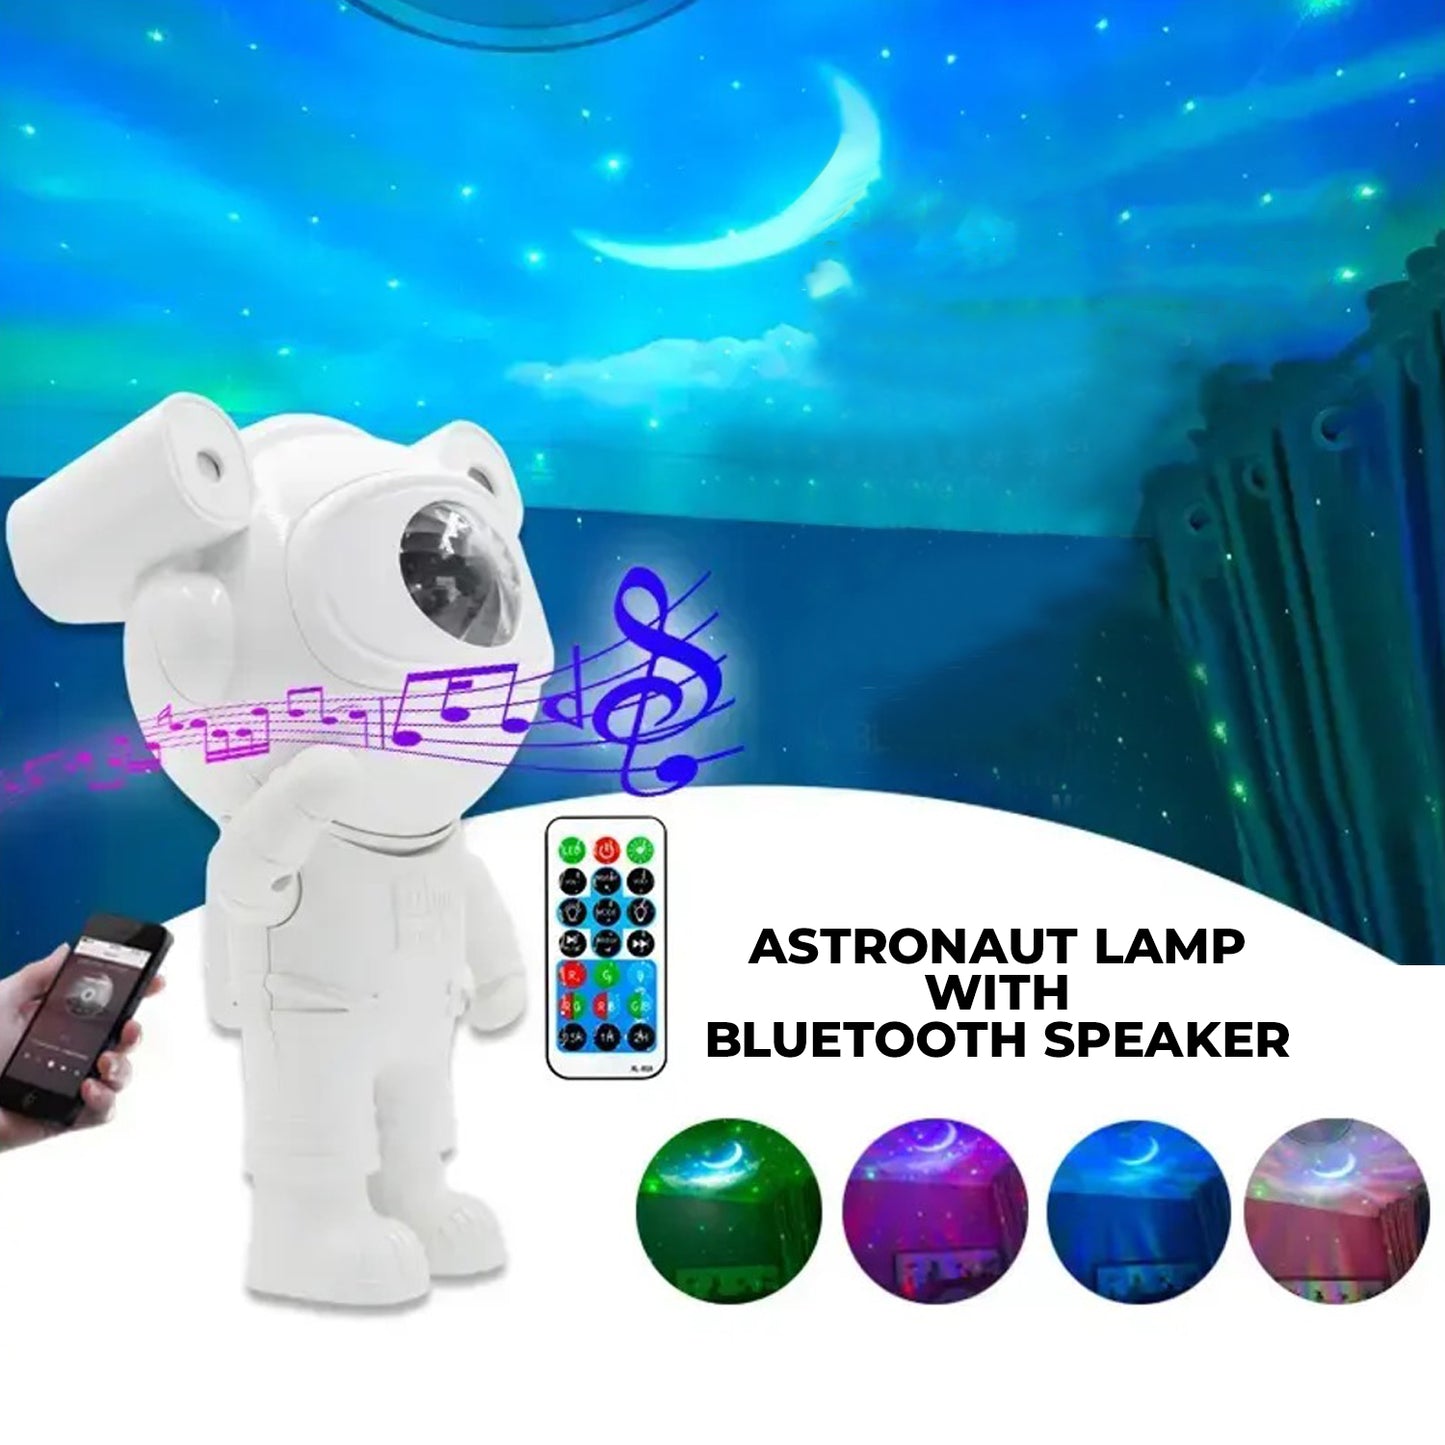 WRADER Galaxy Star Lamp with Speaker Nebula Astronaut Lamp for Kids Starry Moon Light Night Lamp